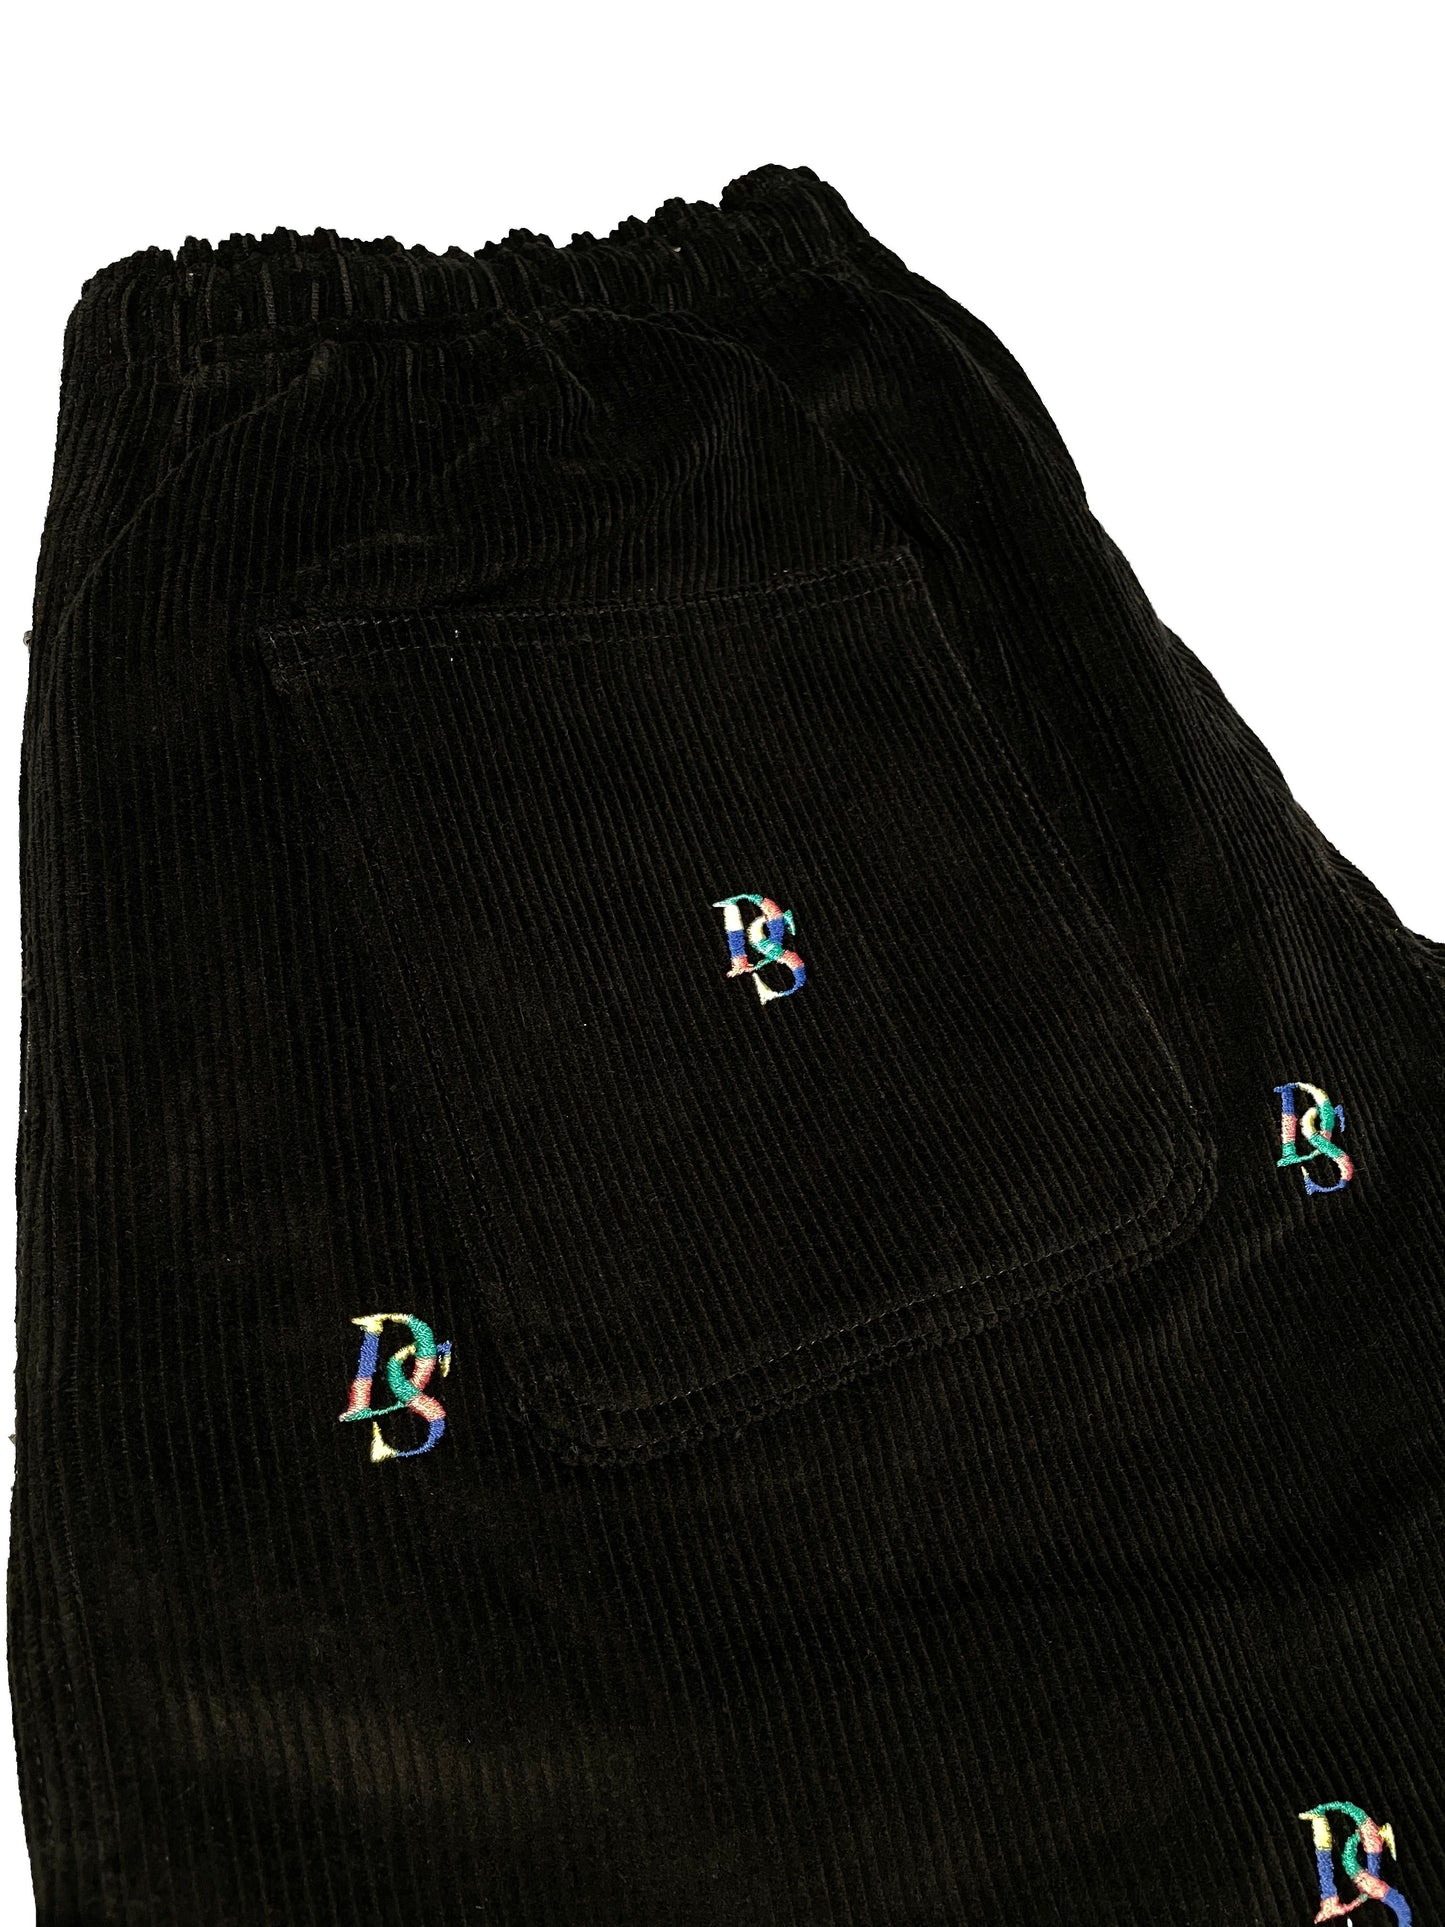 Black Cords '' Rainbows Overall DS Embroideries''